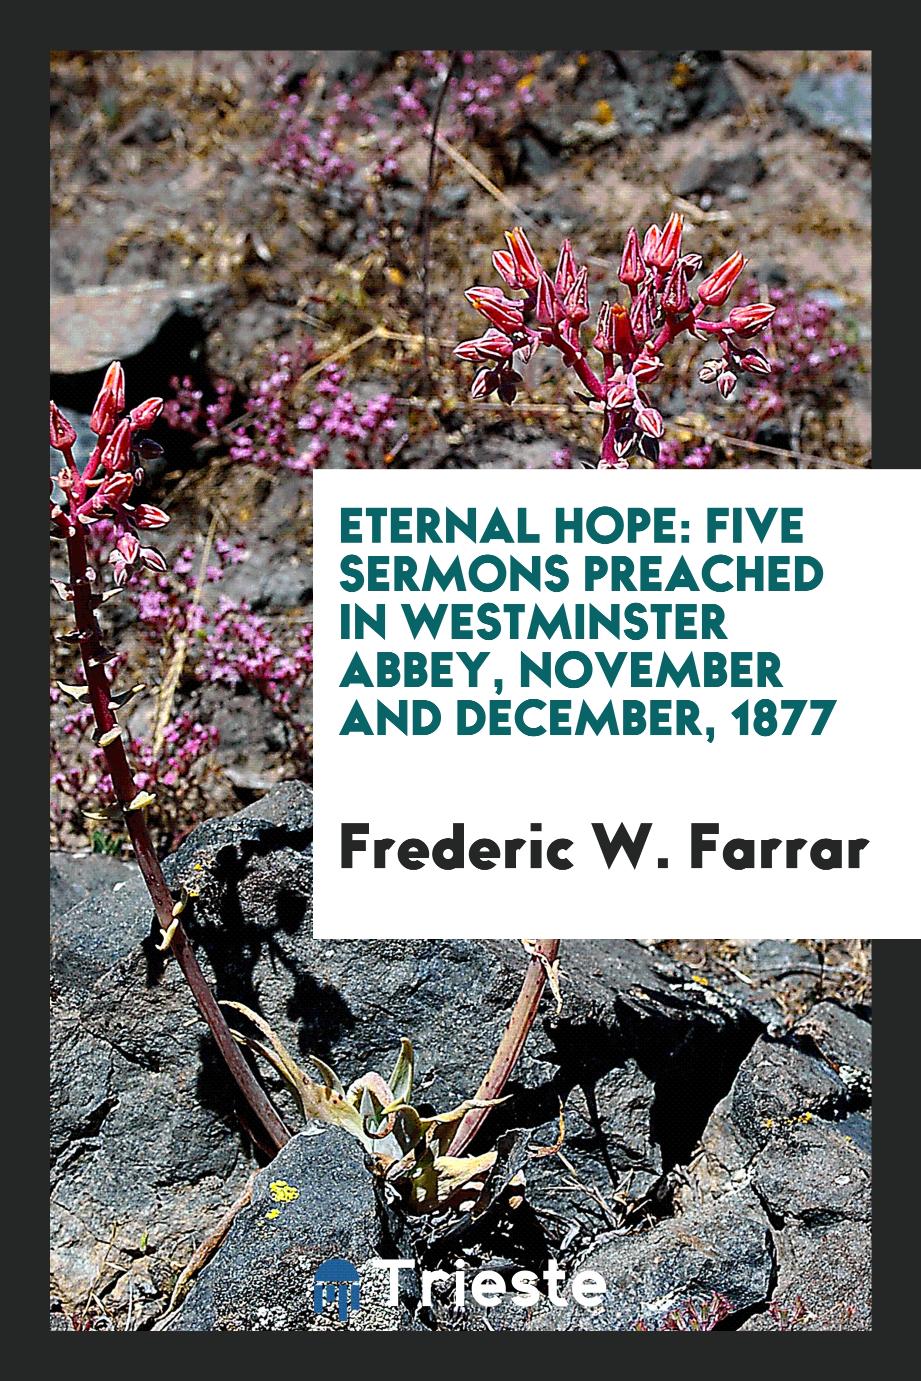 Frederic W. Farrar - Eternal Hope: Five Sermons Preached in Westminster Abbey, November and December, 1877